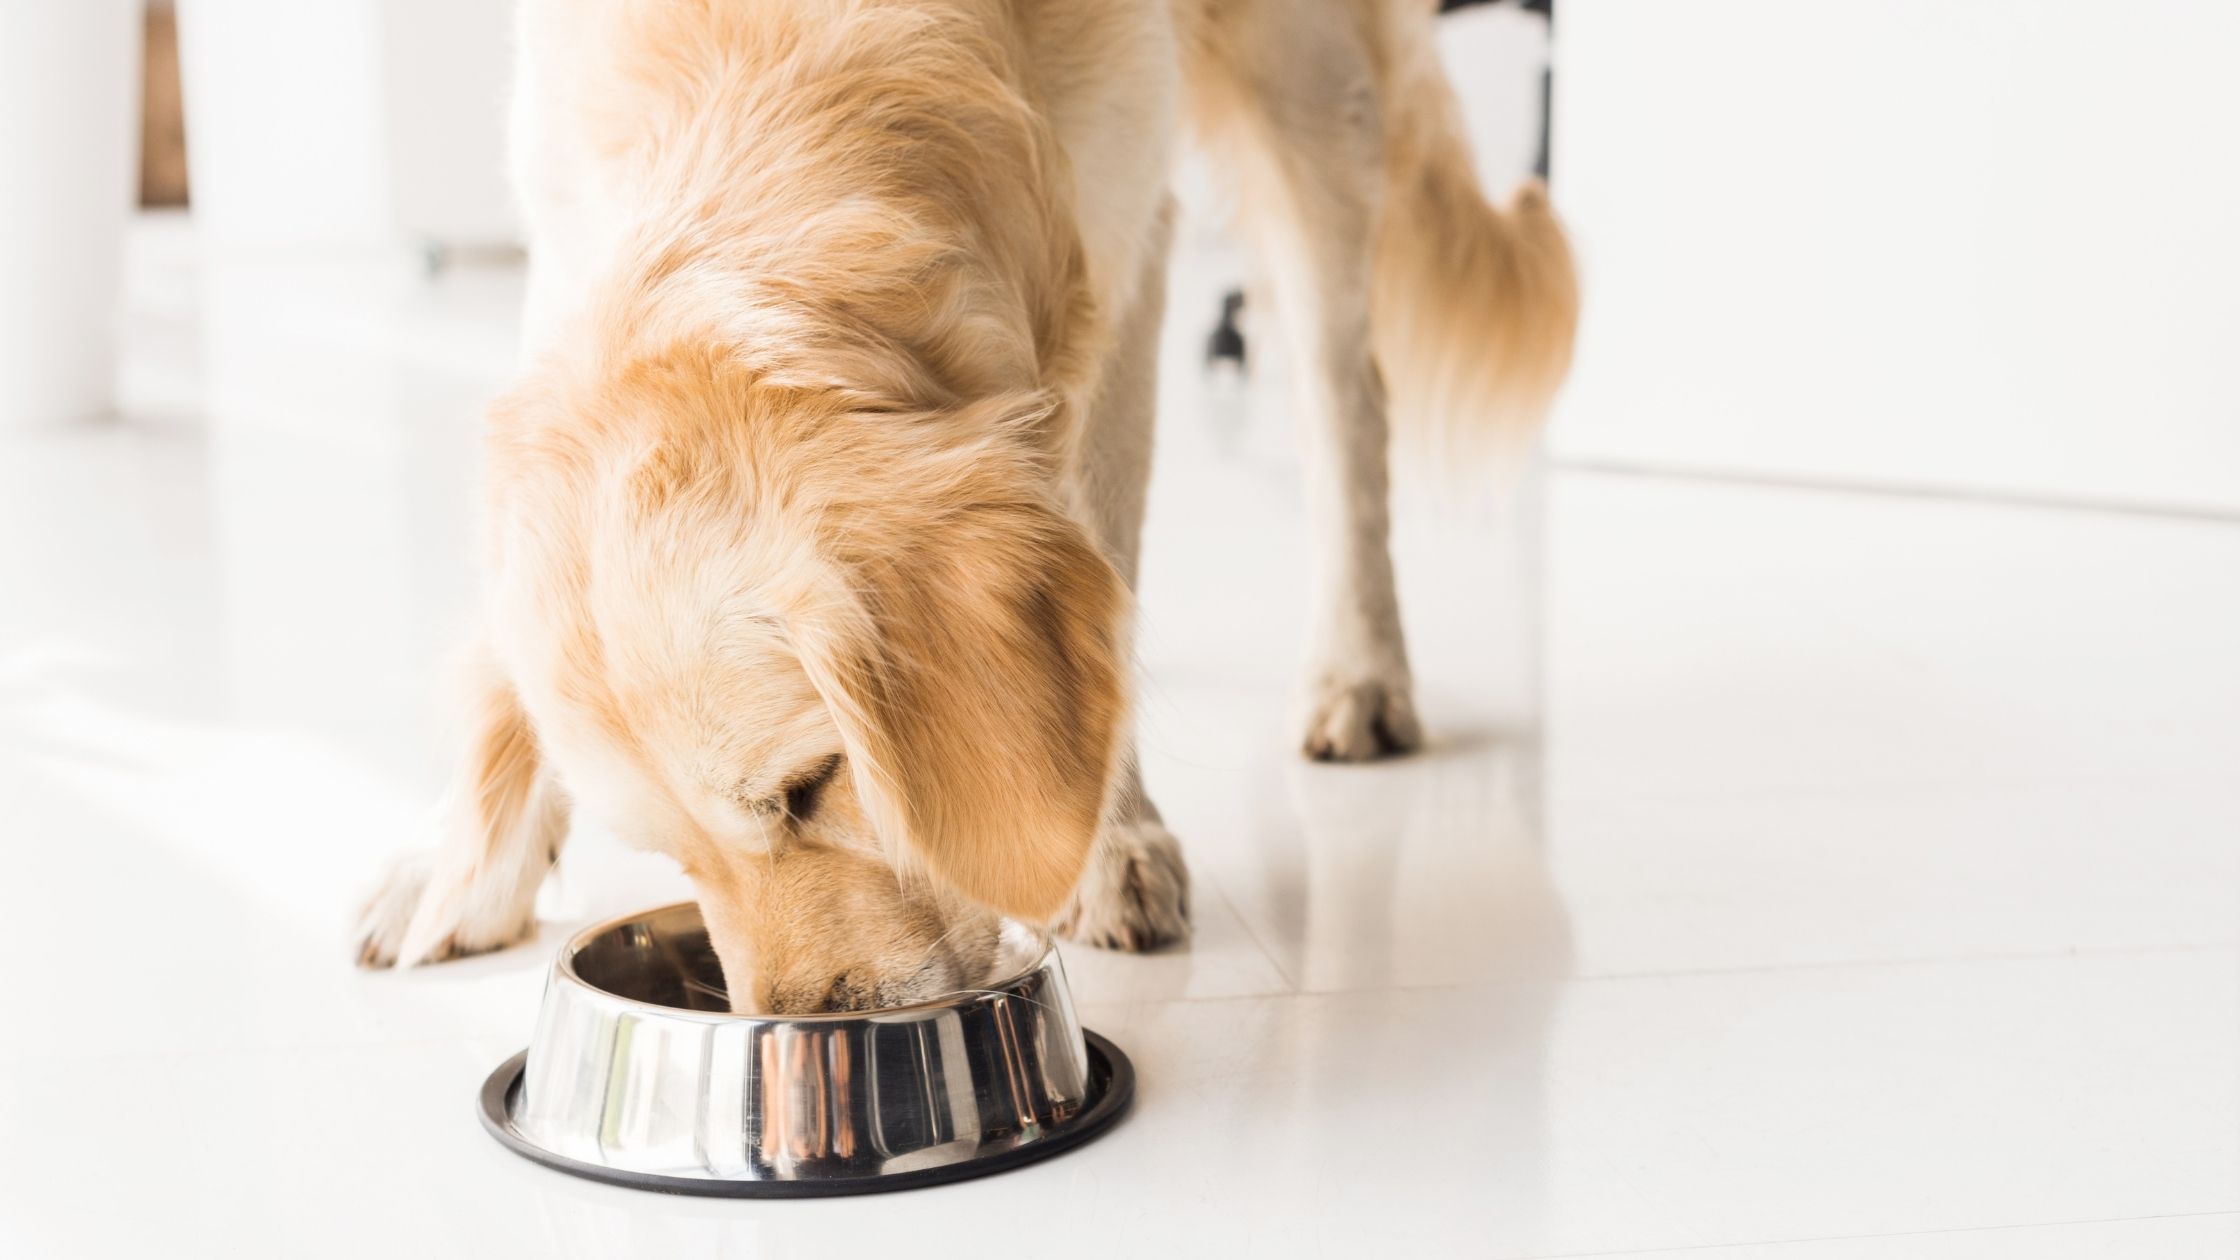 The FDA is alerting pet parents and vets about a new dry dog food recall alert. This comes after at least 28 deaths and 8 illnesses in dogs.